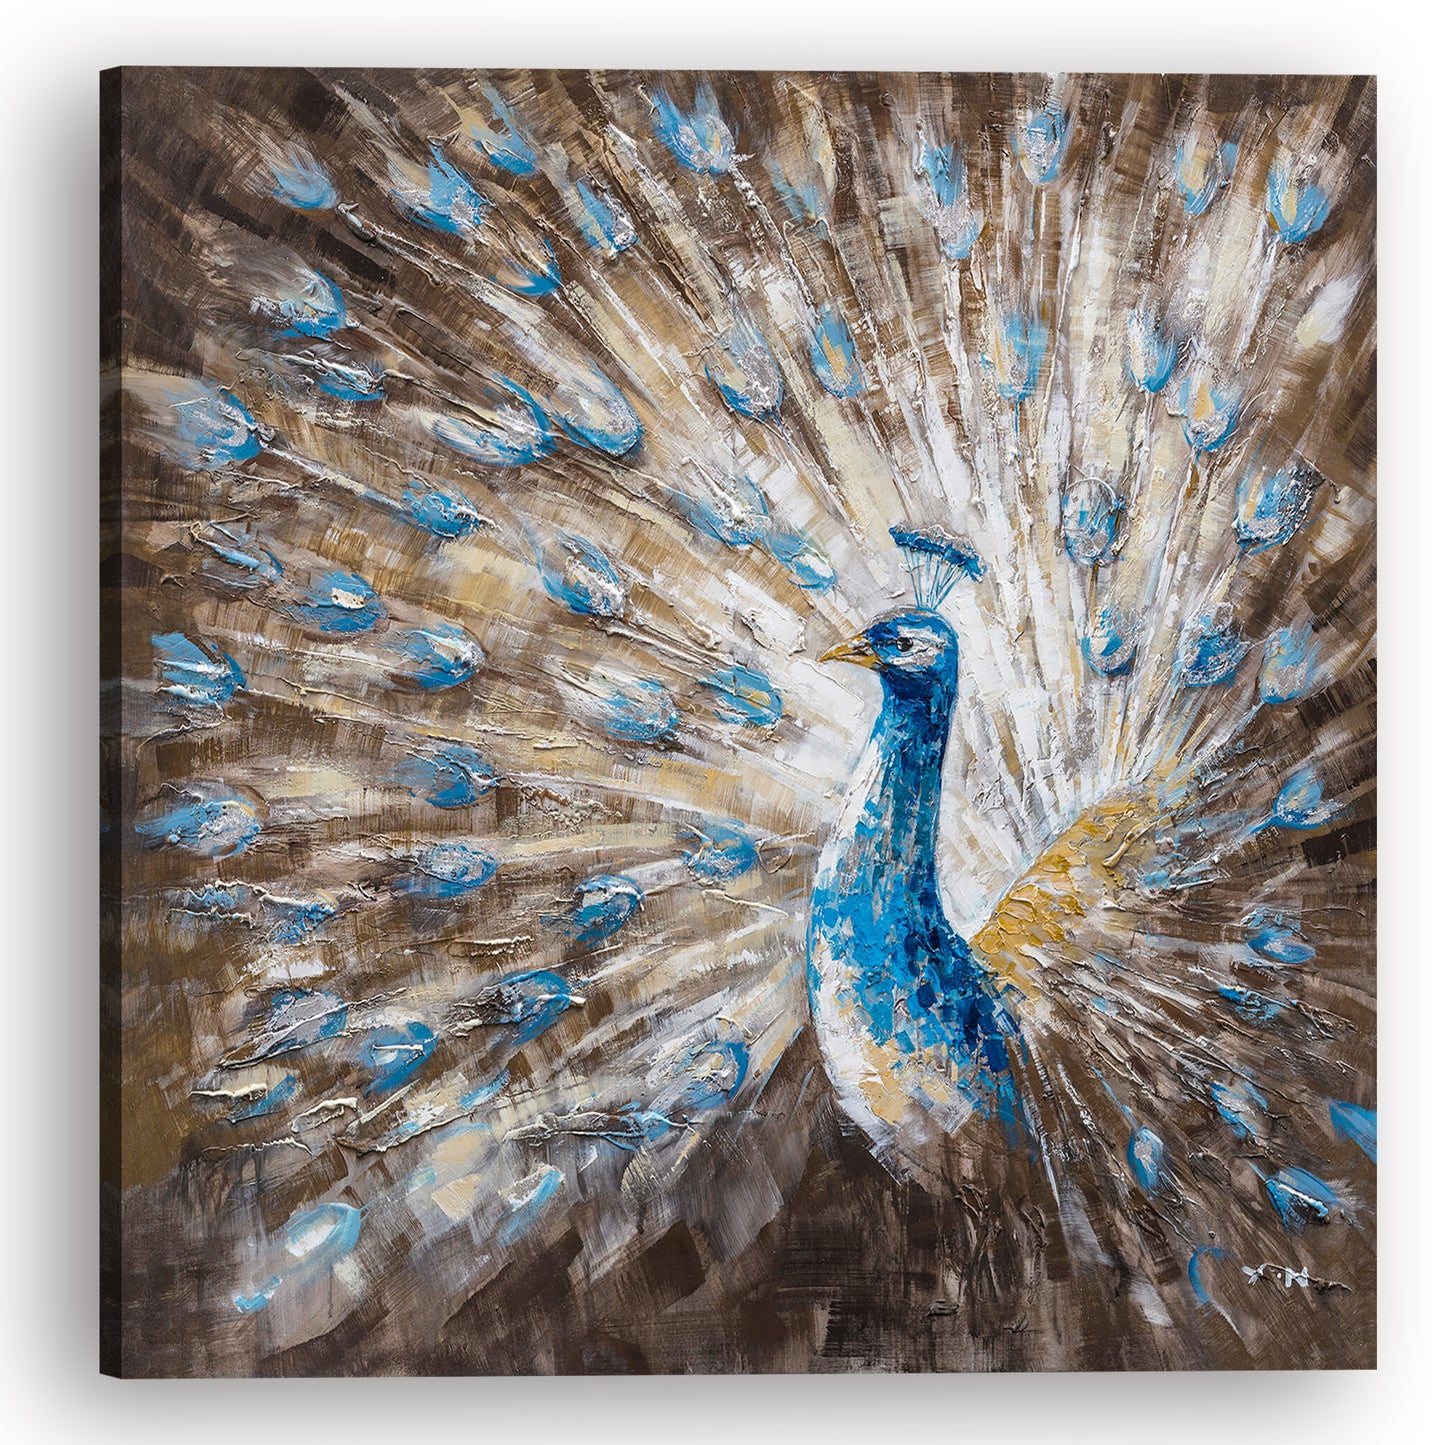 "The Shining Peacock" Hand Painted on Wrapped Canvas